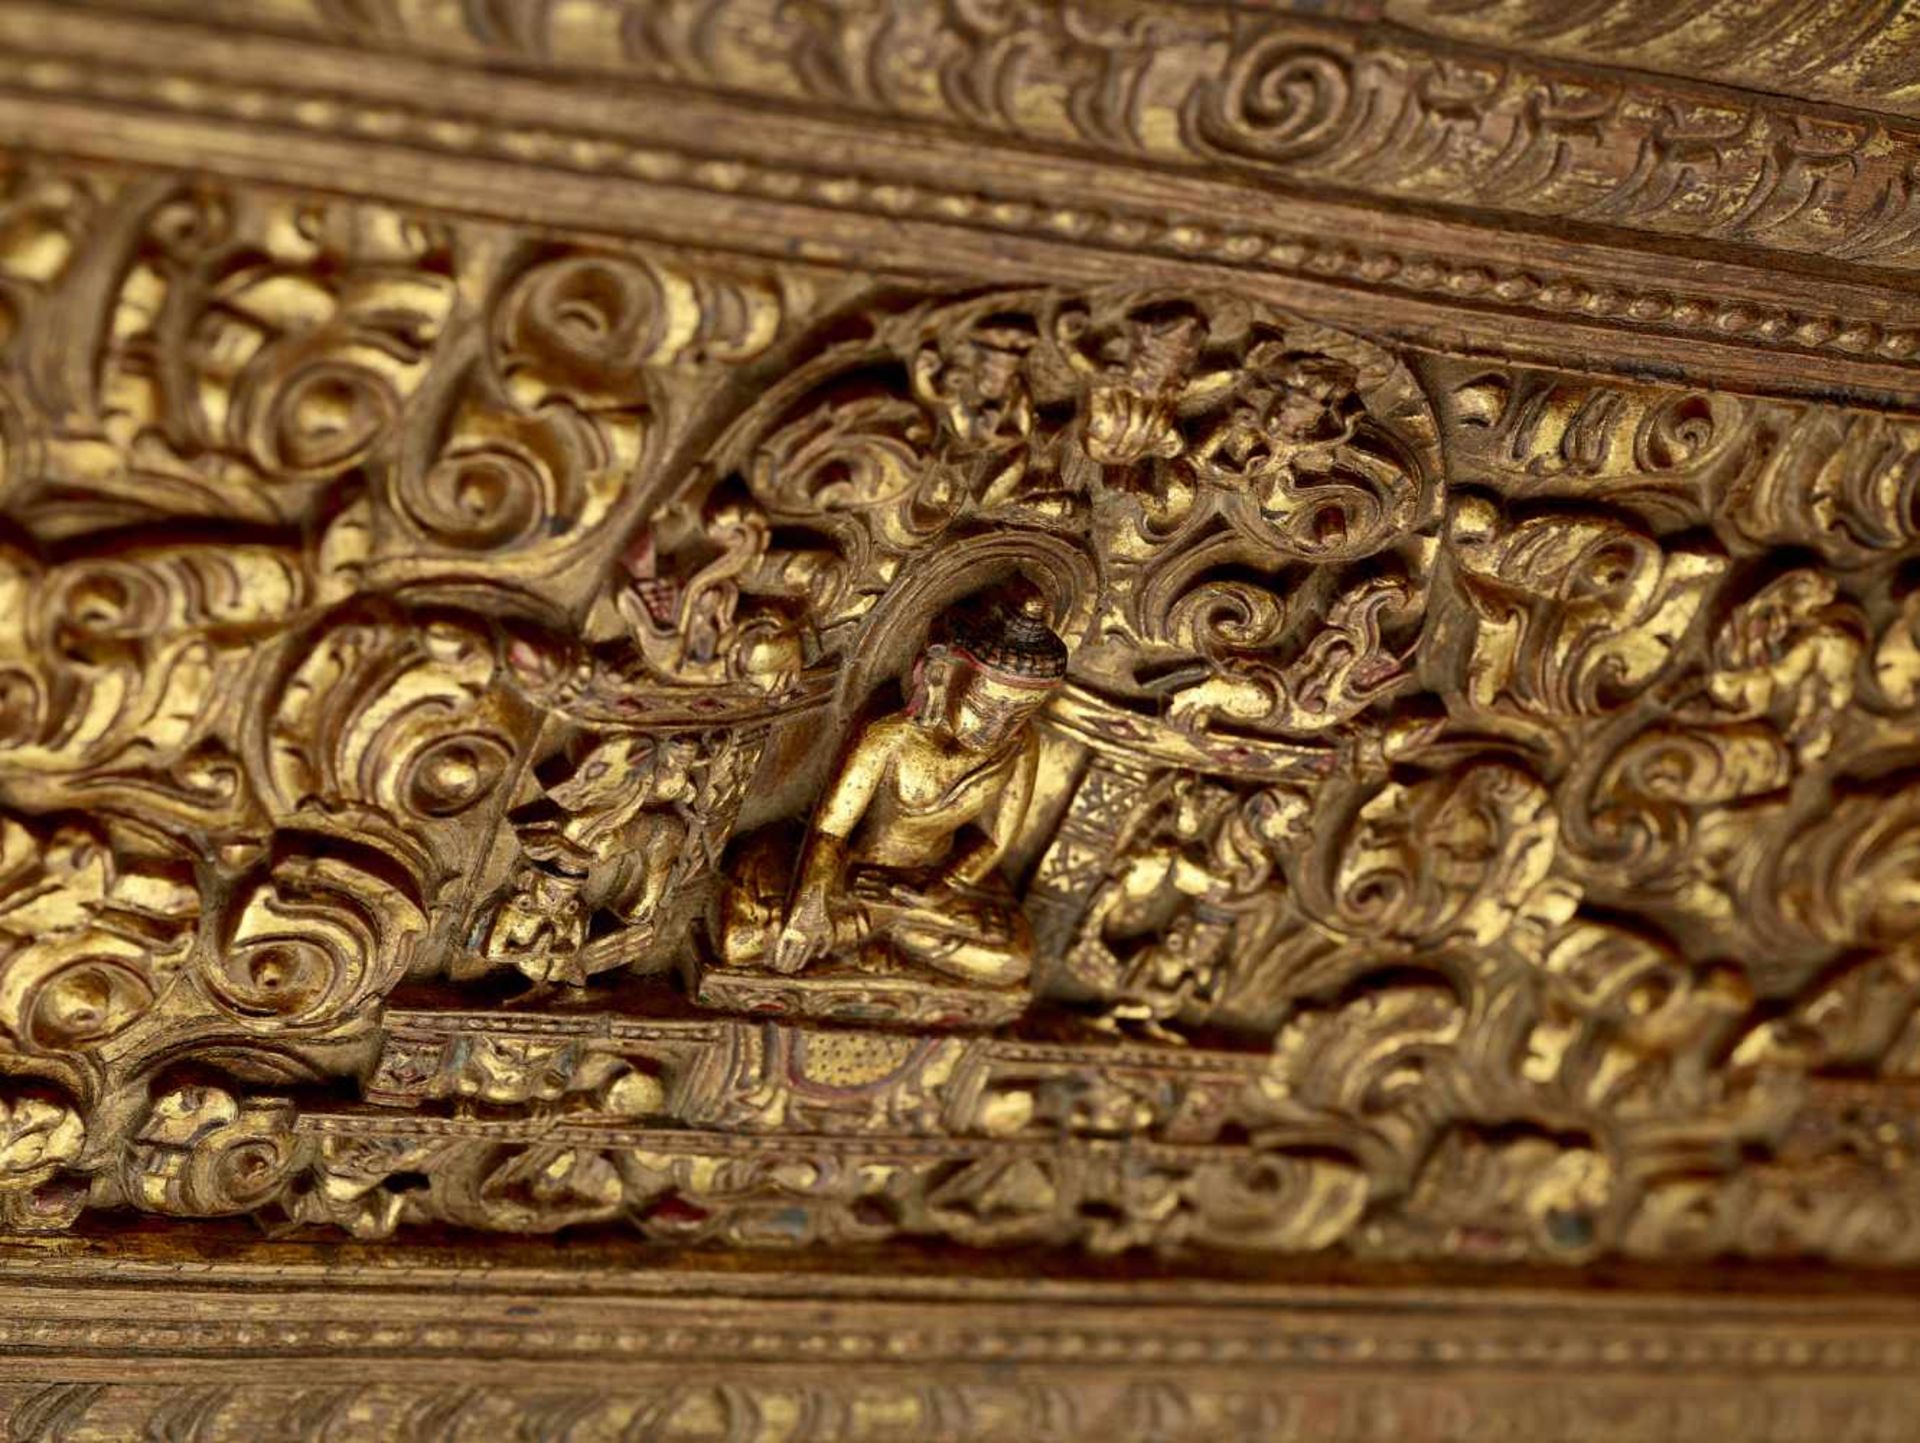 A RARE MANUSCRIPT COVER 17TH CENTURY Tibet, 17th - earlier 18th century. The finely carved and - Bild 2 aus 5